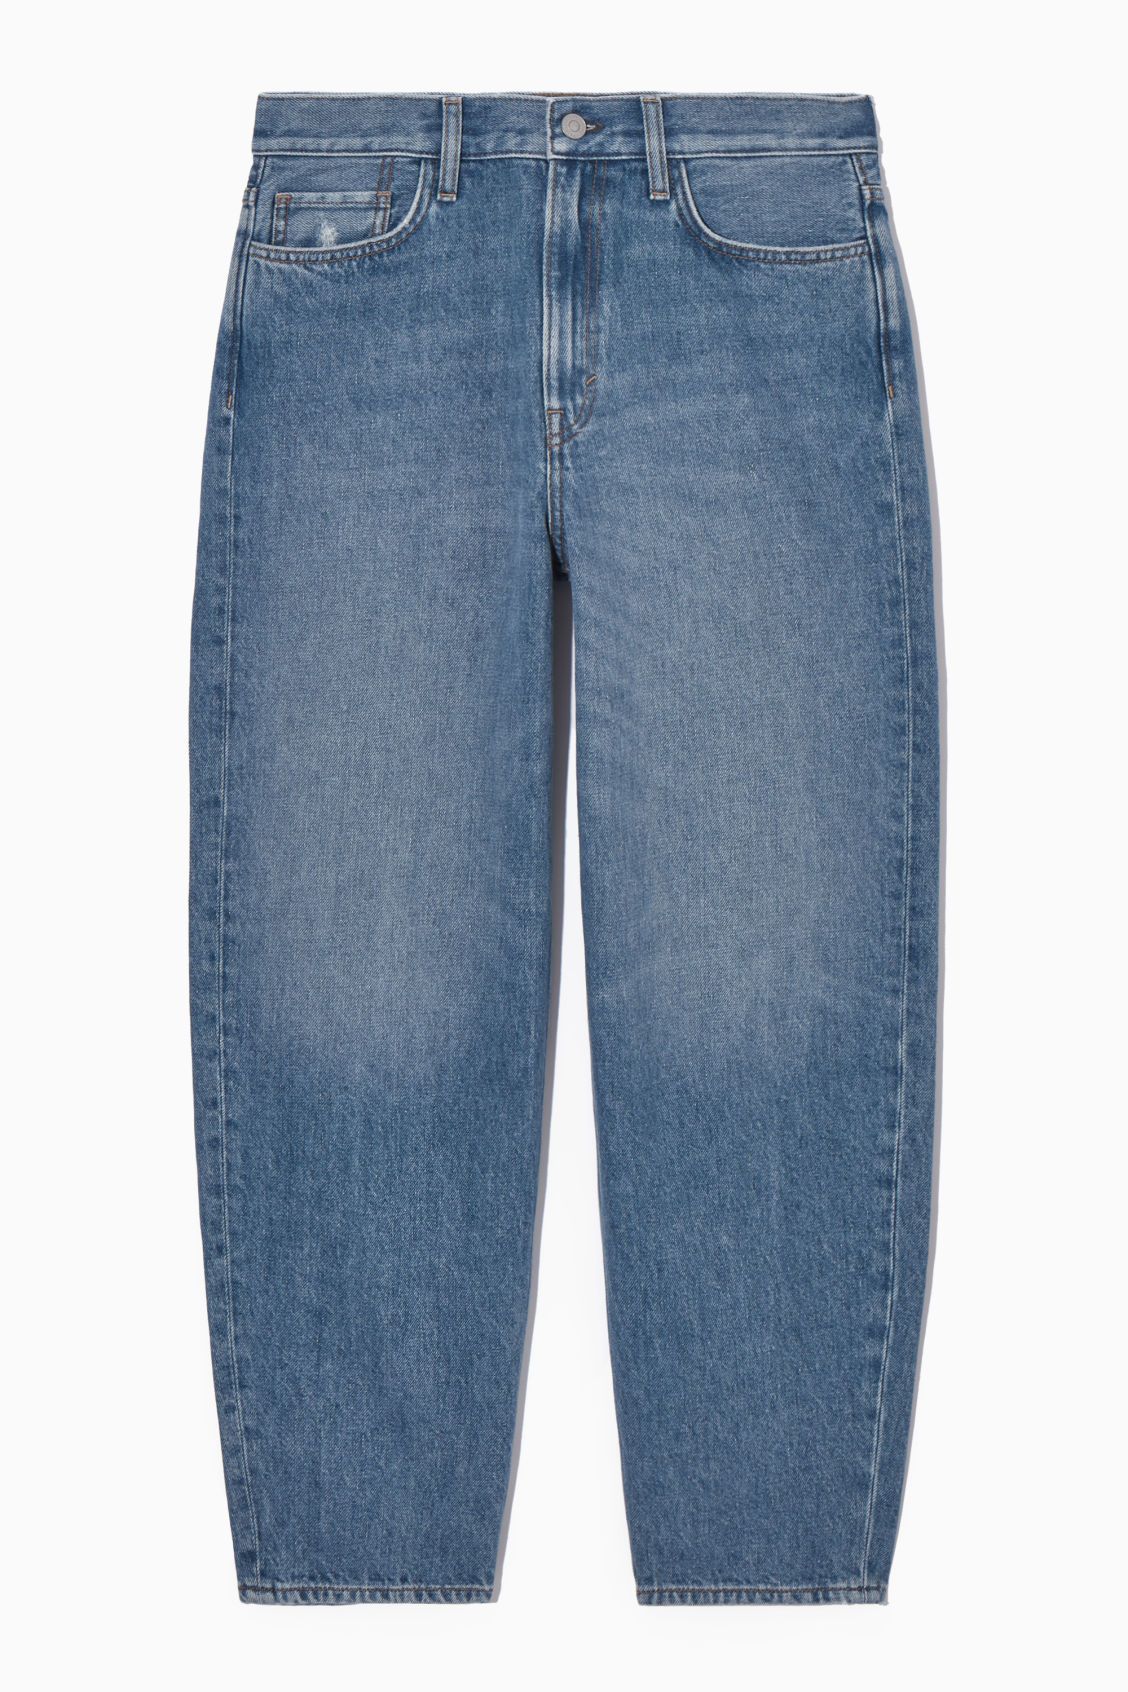 ARCH JEANS - TAPERED | COS UK